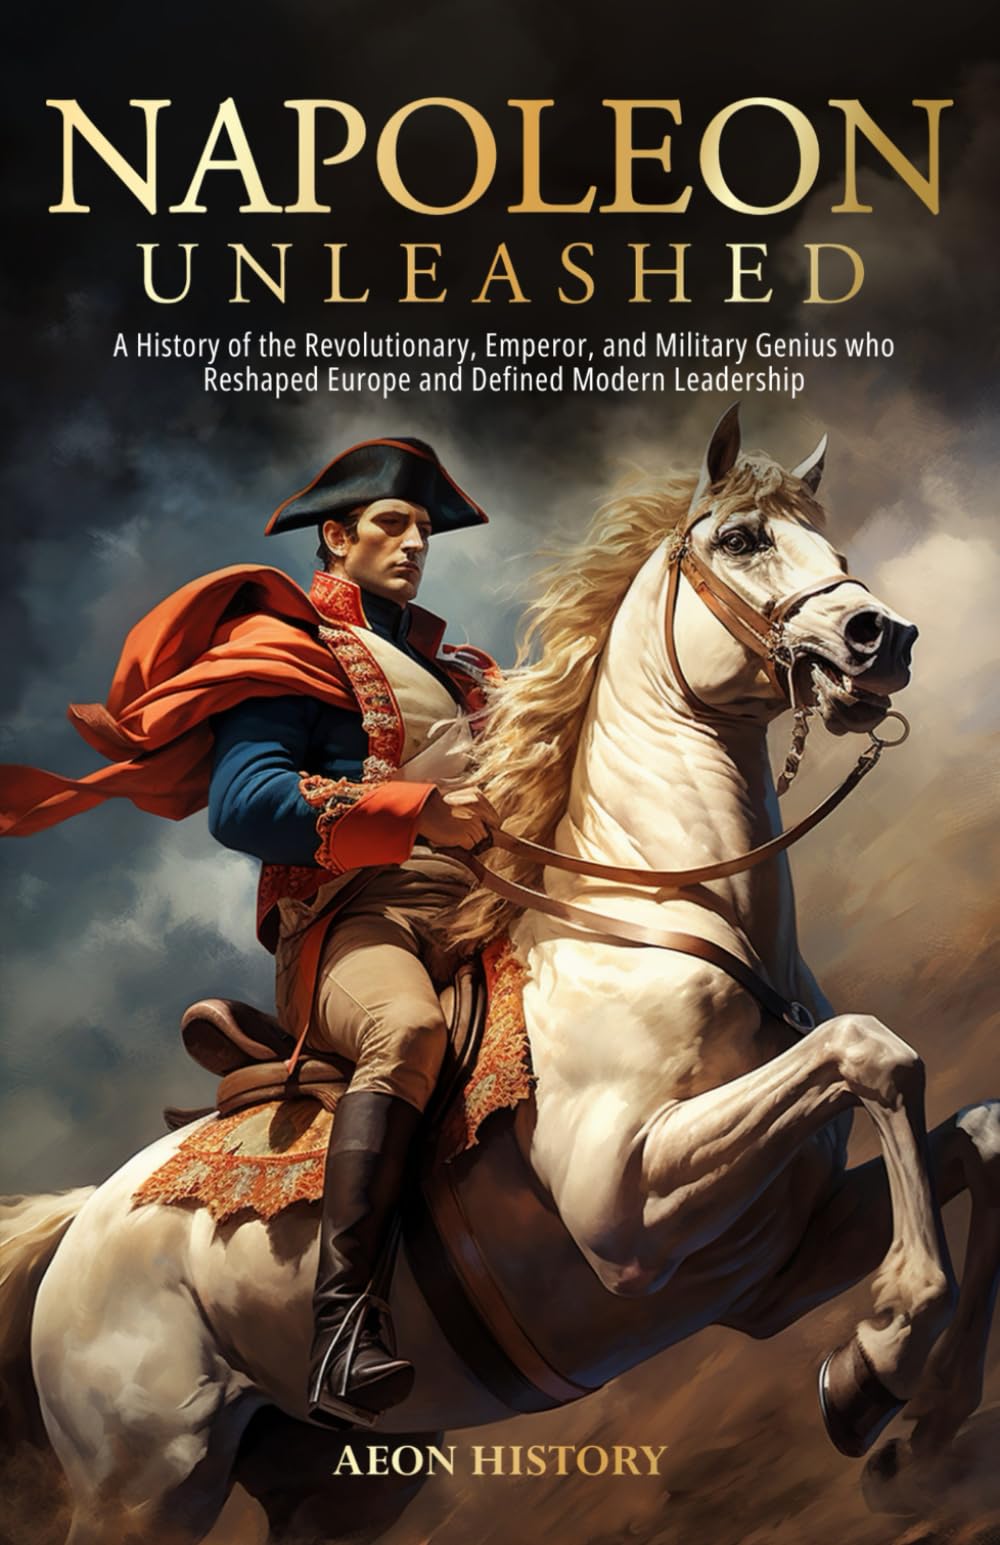 Napoleon Unleashed: A History of the Revolutionary, Emperor, and Military Genius who Reshaped Europe and Defined Modern Leadership